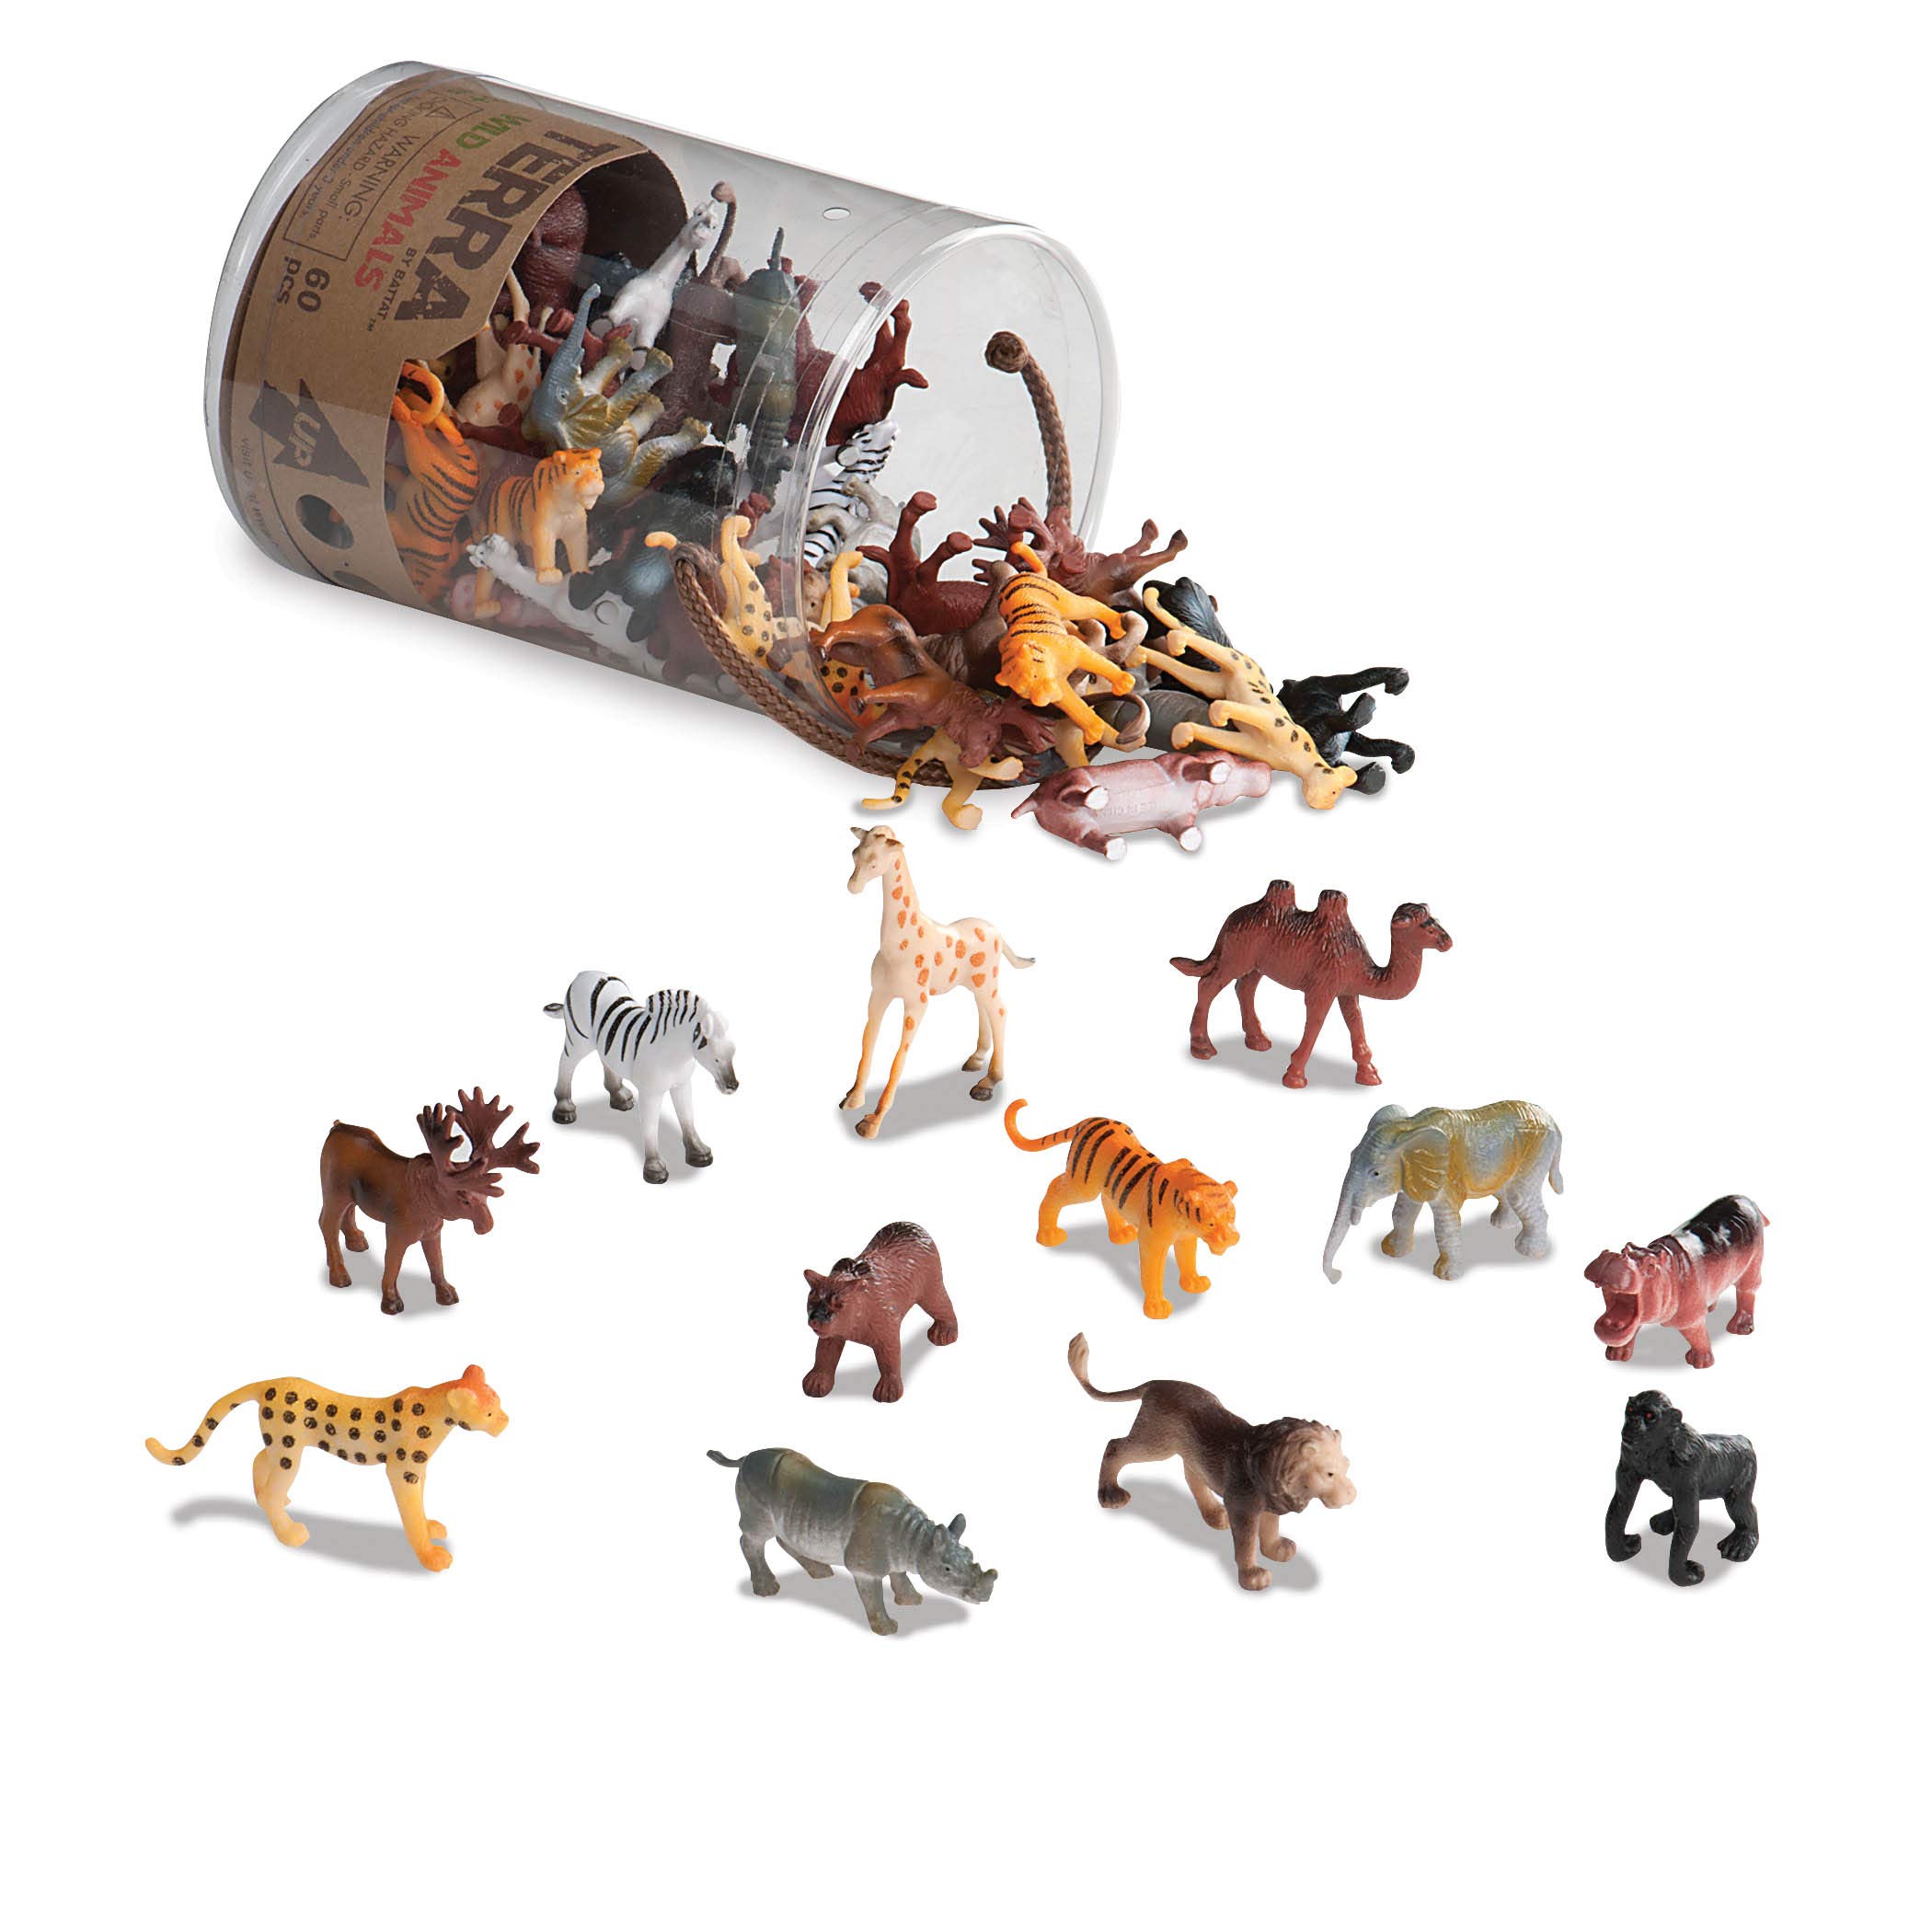 Terra by Battat – Assorted Miniature Wild Animal Toys For Kids 3+ (60 Pc) Multi, 2